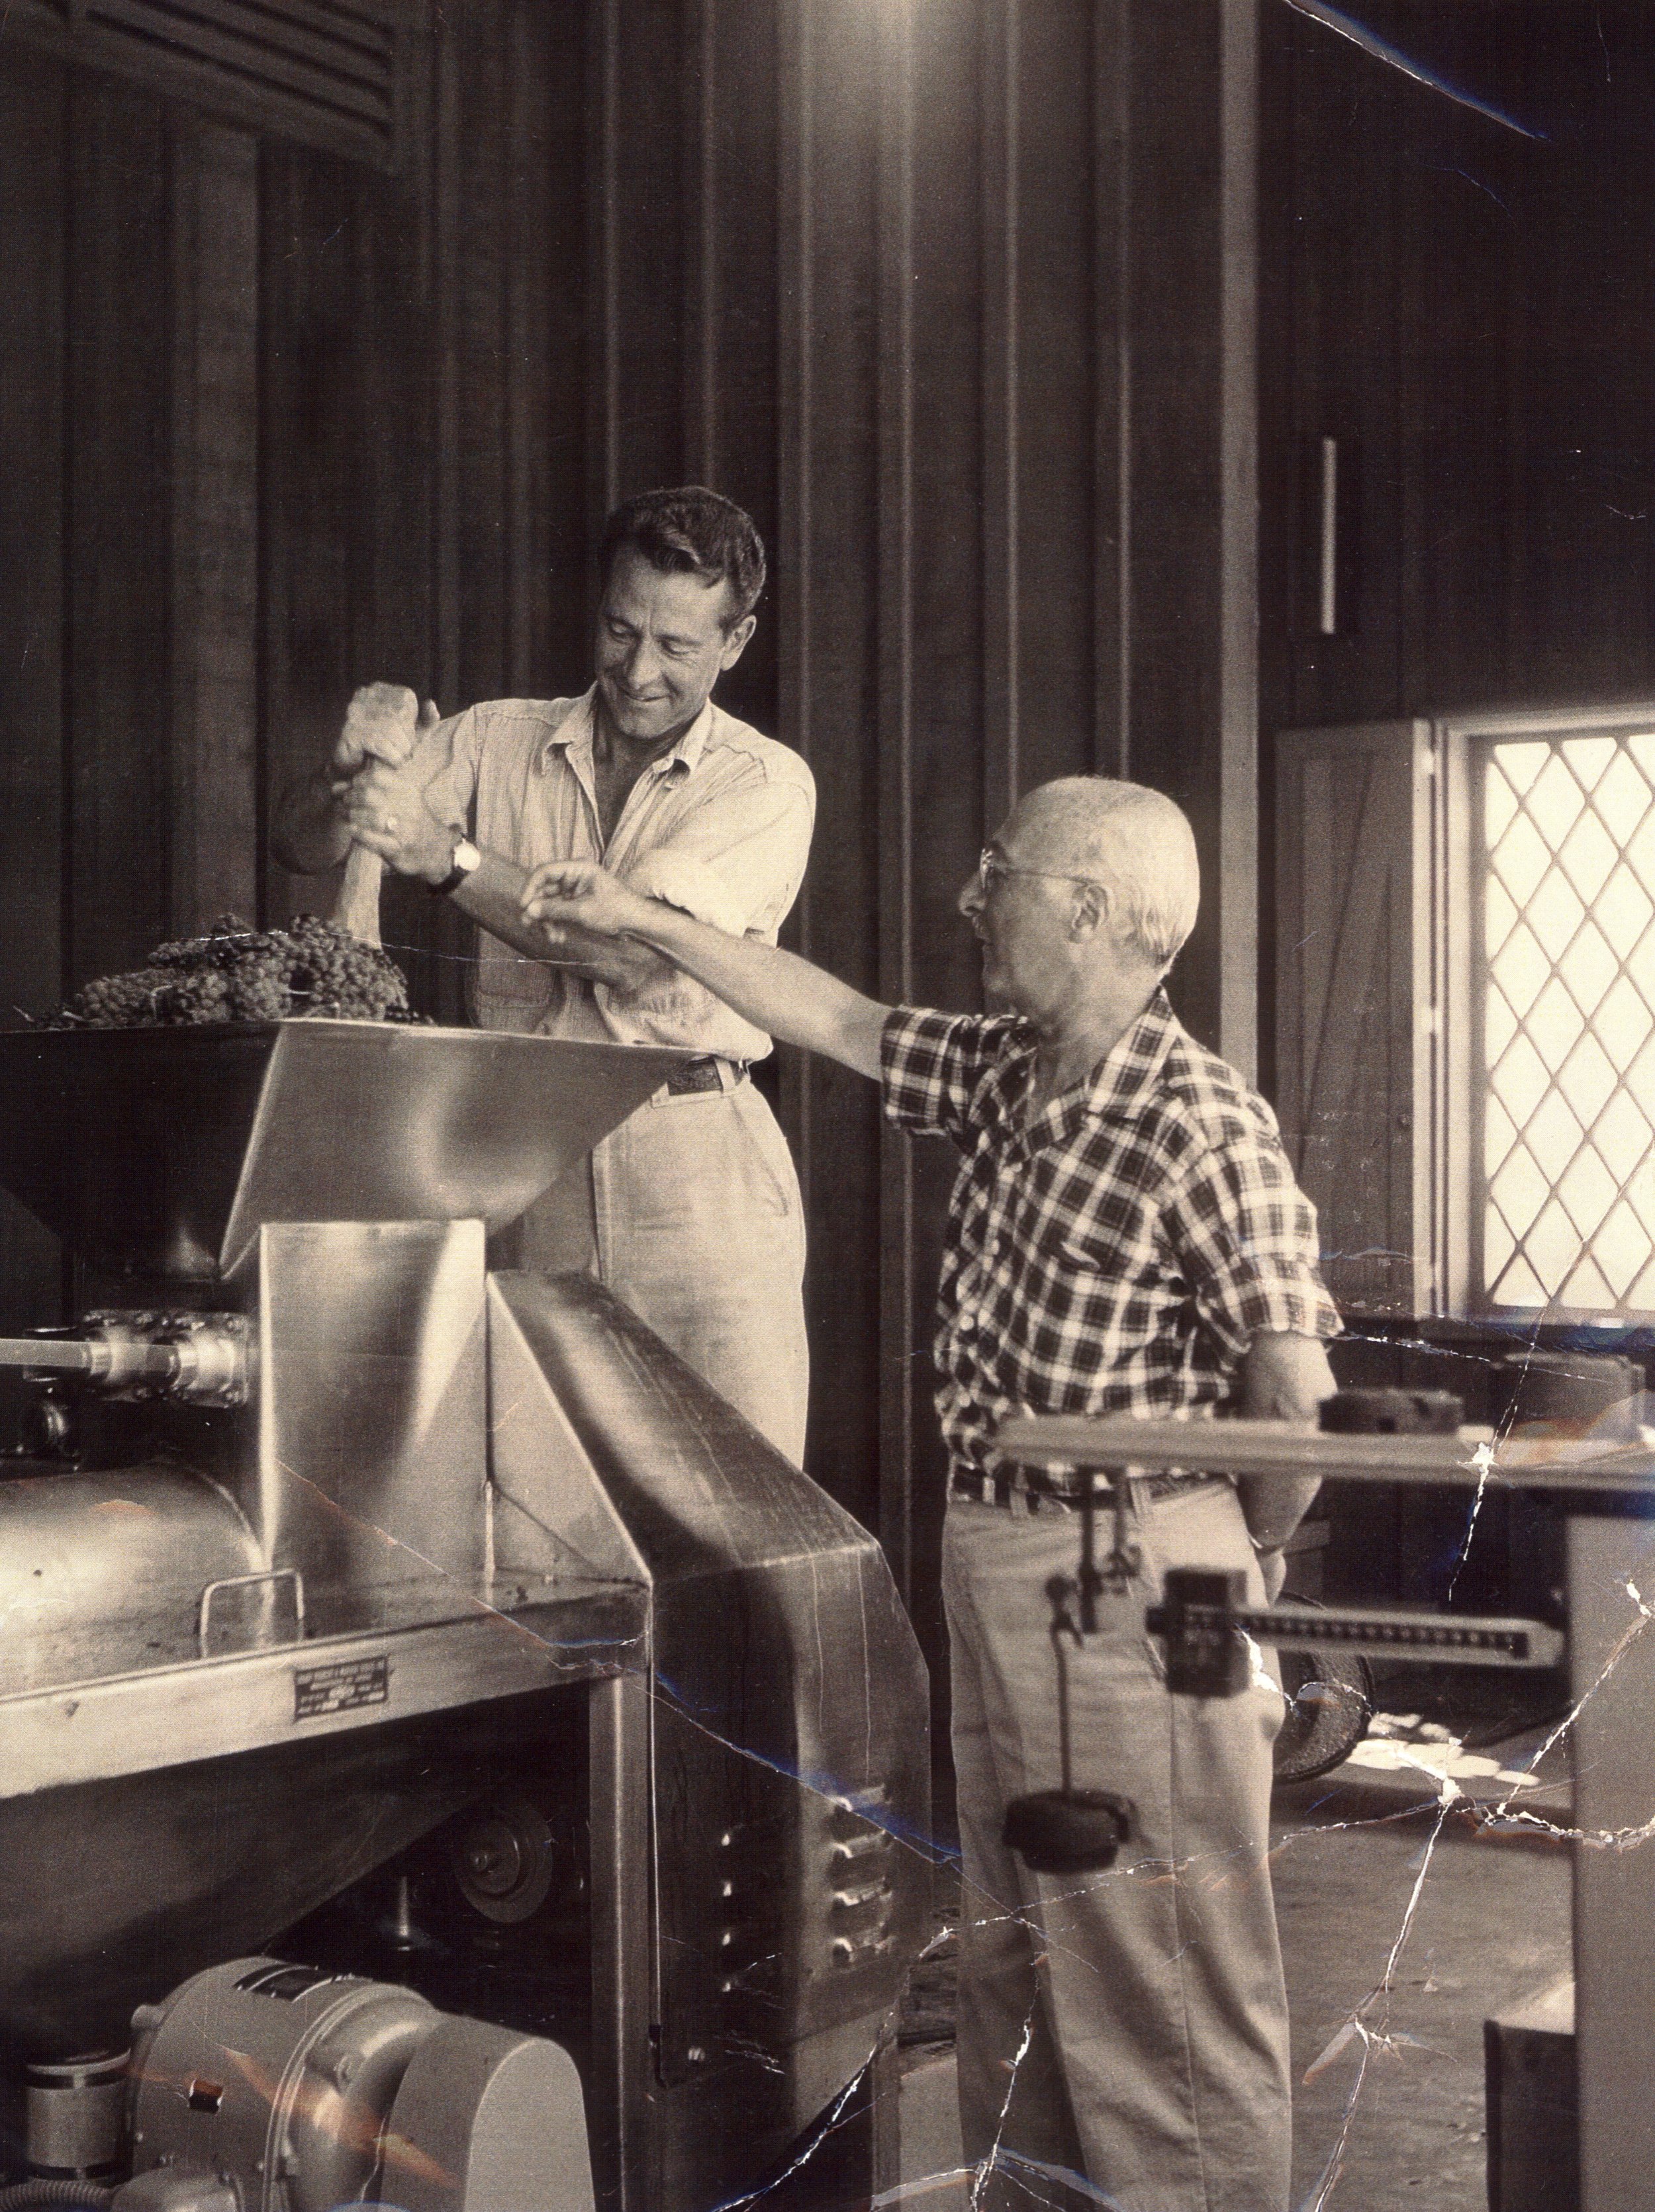 Black and White photo of Ivan Schoch and James Zellerbach using winery equipment in the 1950s